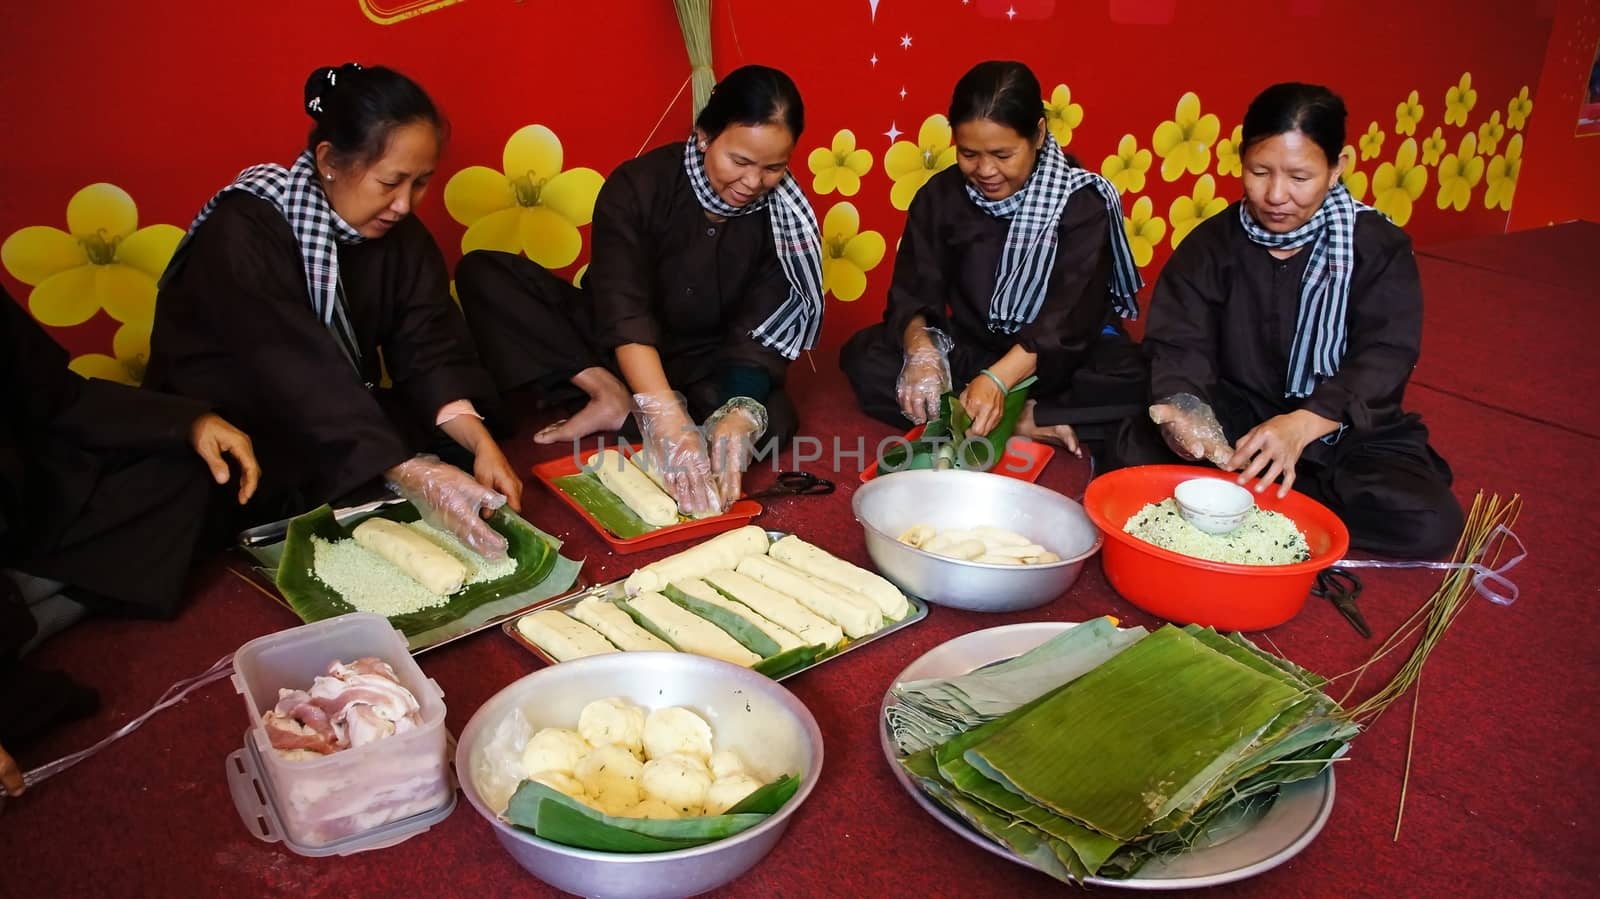 Group of people making traditional Vietnam food for Lunar New Ye by xuanhuongho